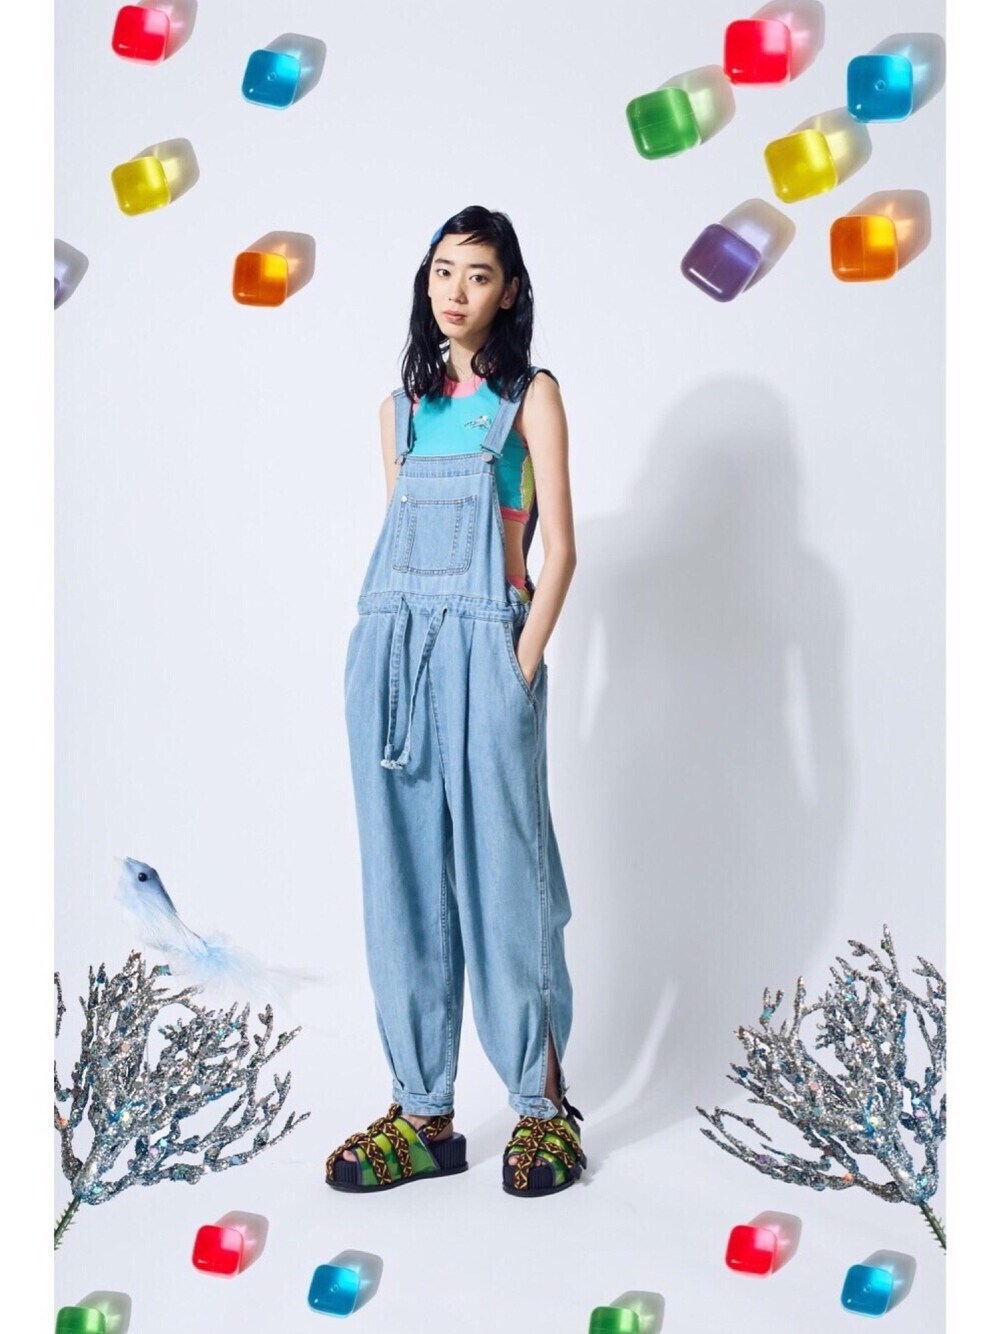 Japanese Women girls cute jeans denim overalls trousers loose